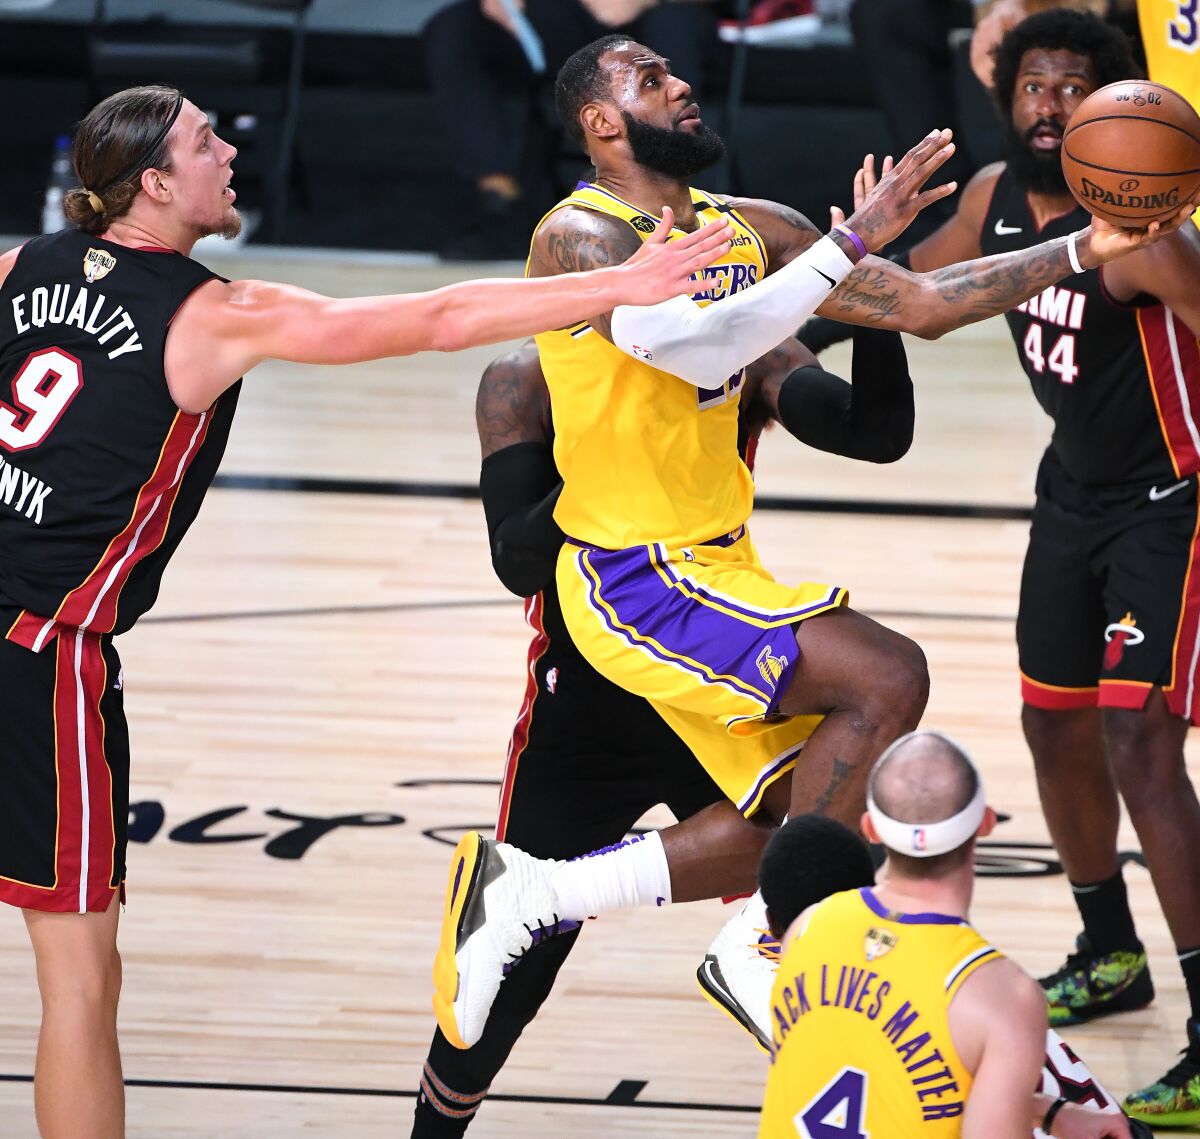 Lakers forward LeBron James drives the lane against the Heat for a layup in Game 1.